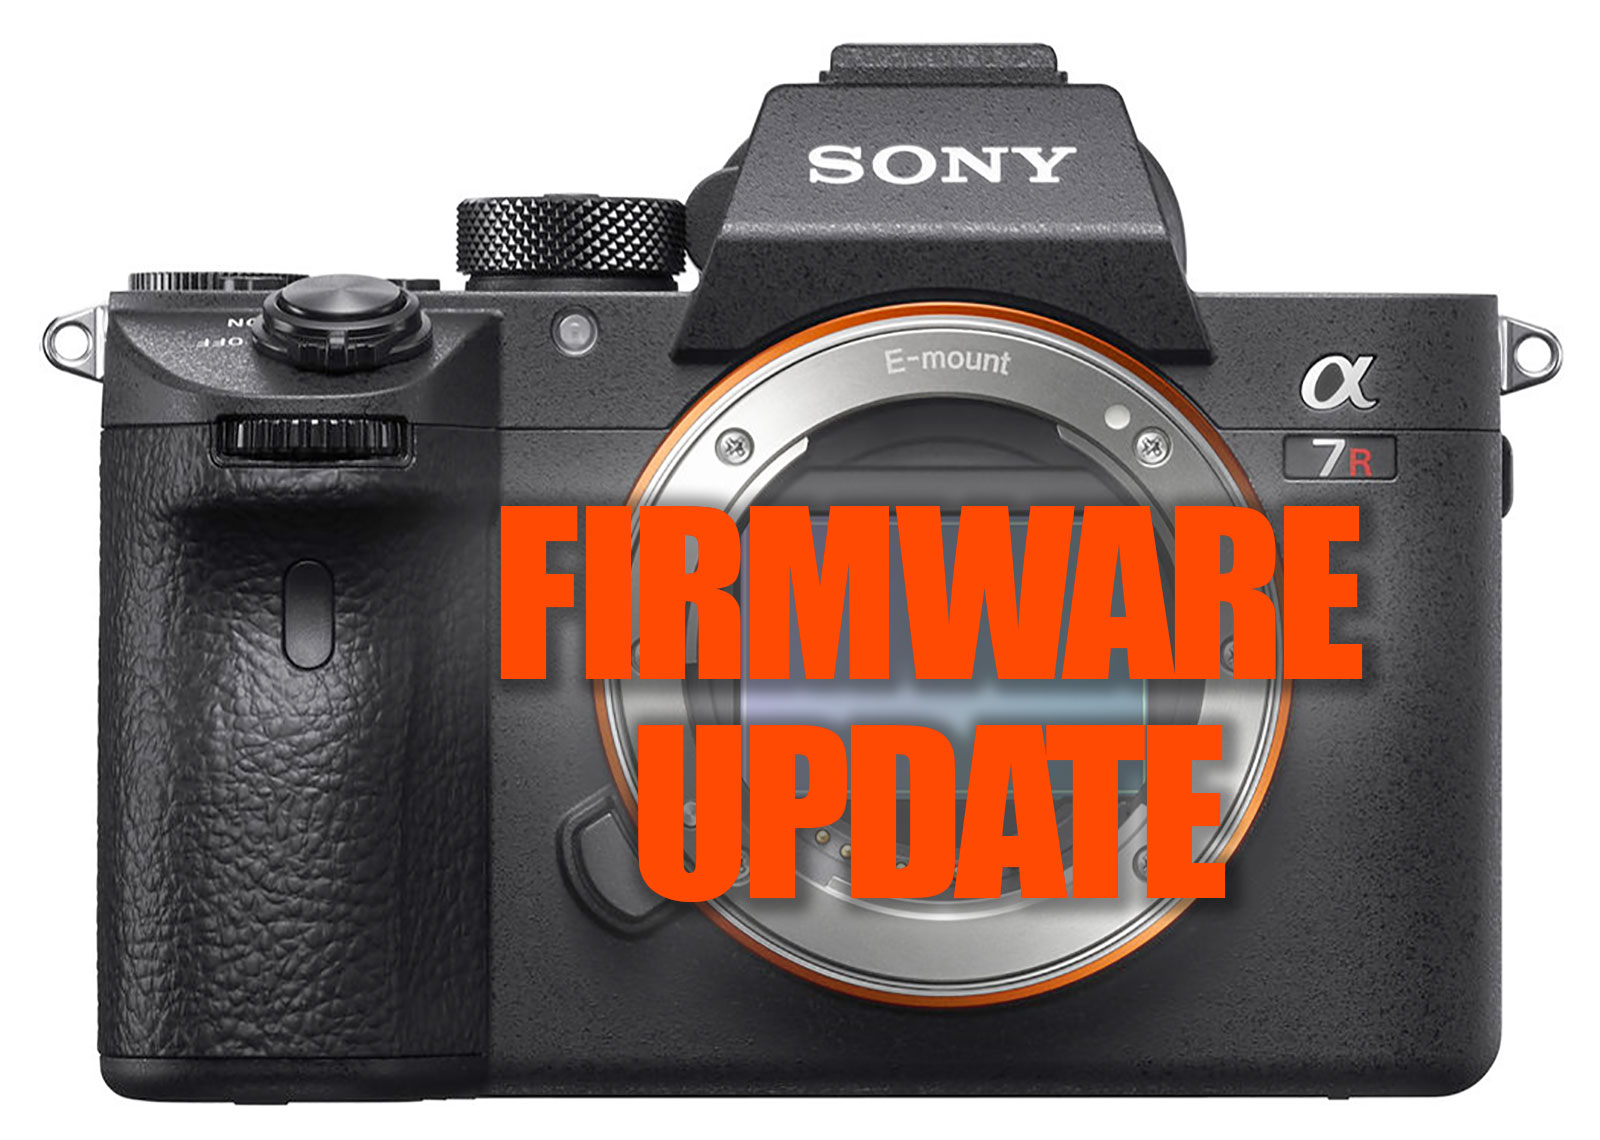 Sony a7R IV Firmware Update